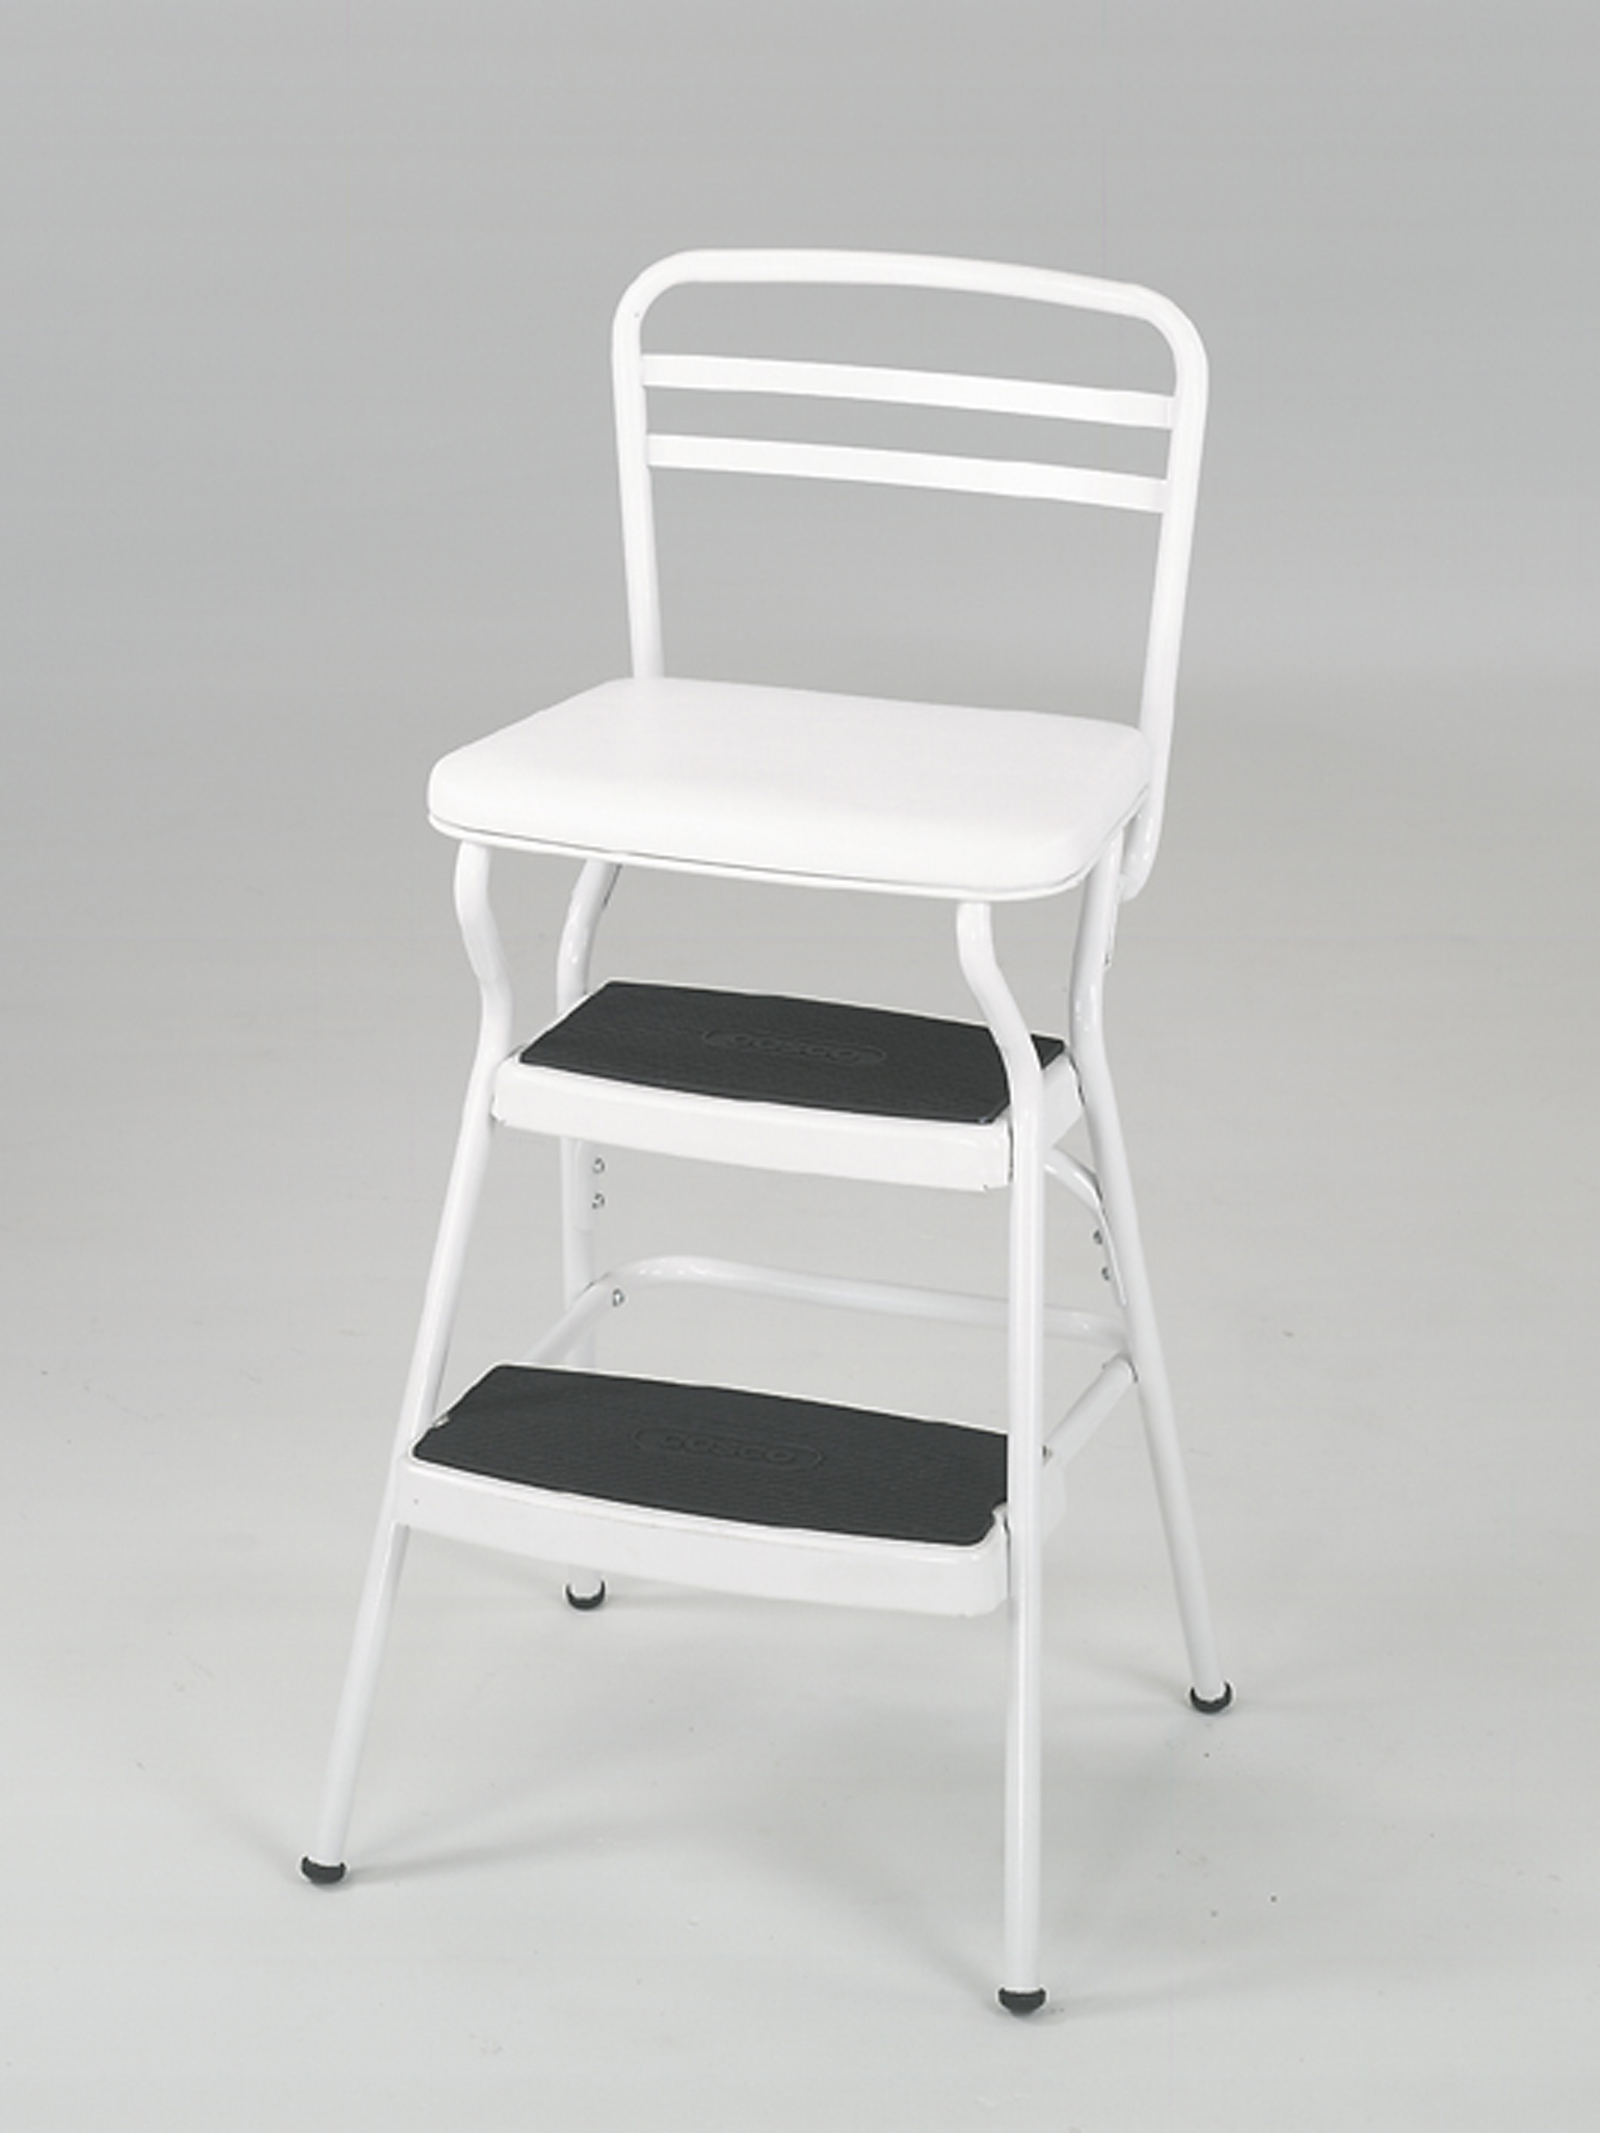 Cosco Chair Step Stool With Lift Up Seat